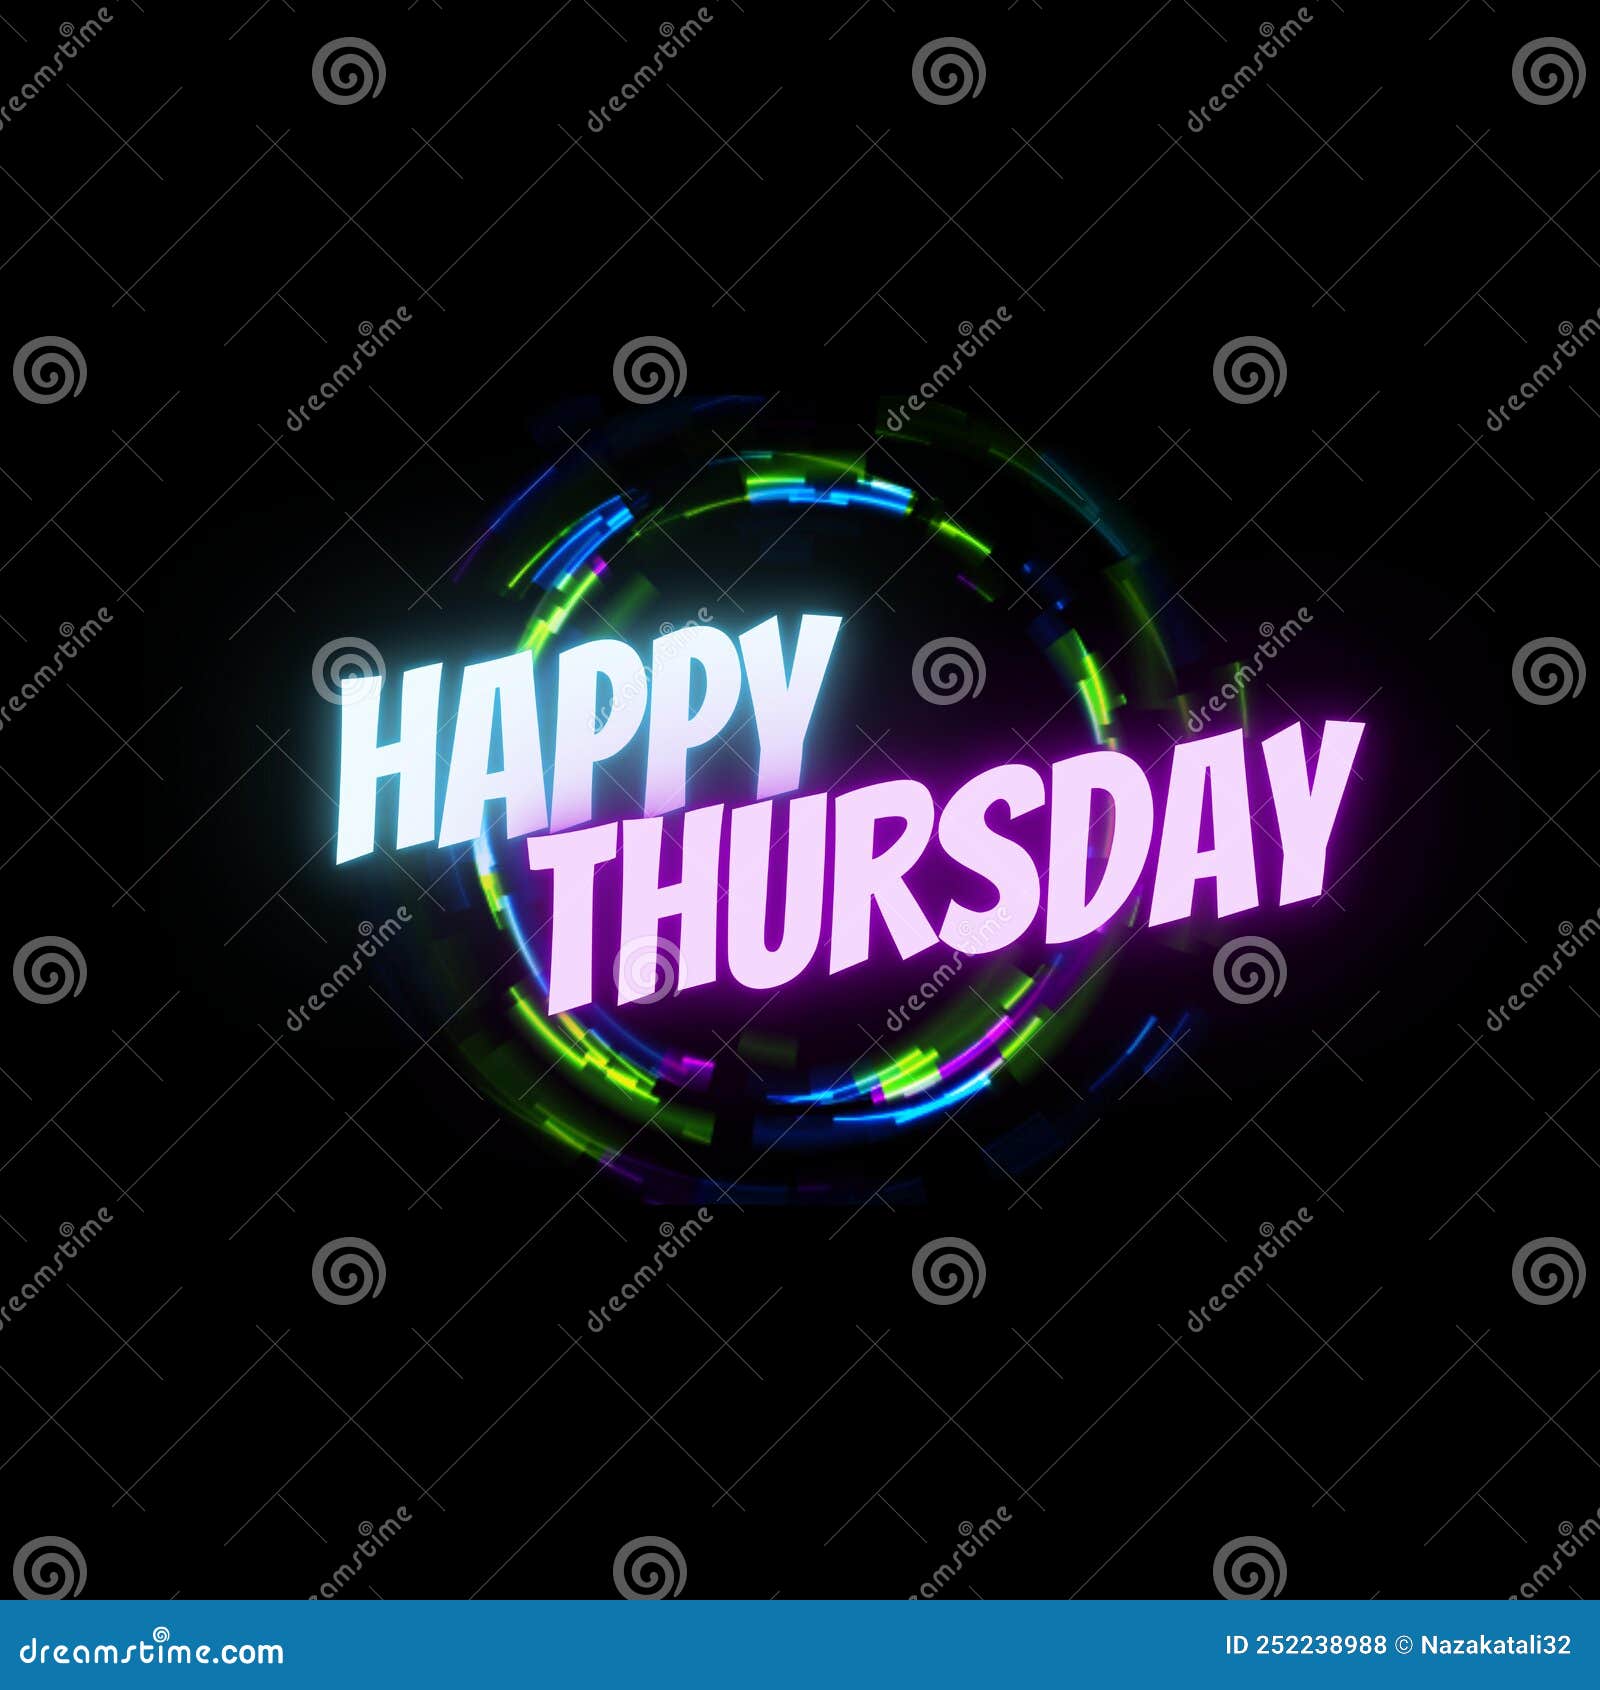 happy thursday glowing text with colorful neon rings & black background. colorful weekdays  for social media.